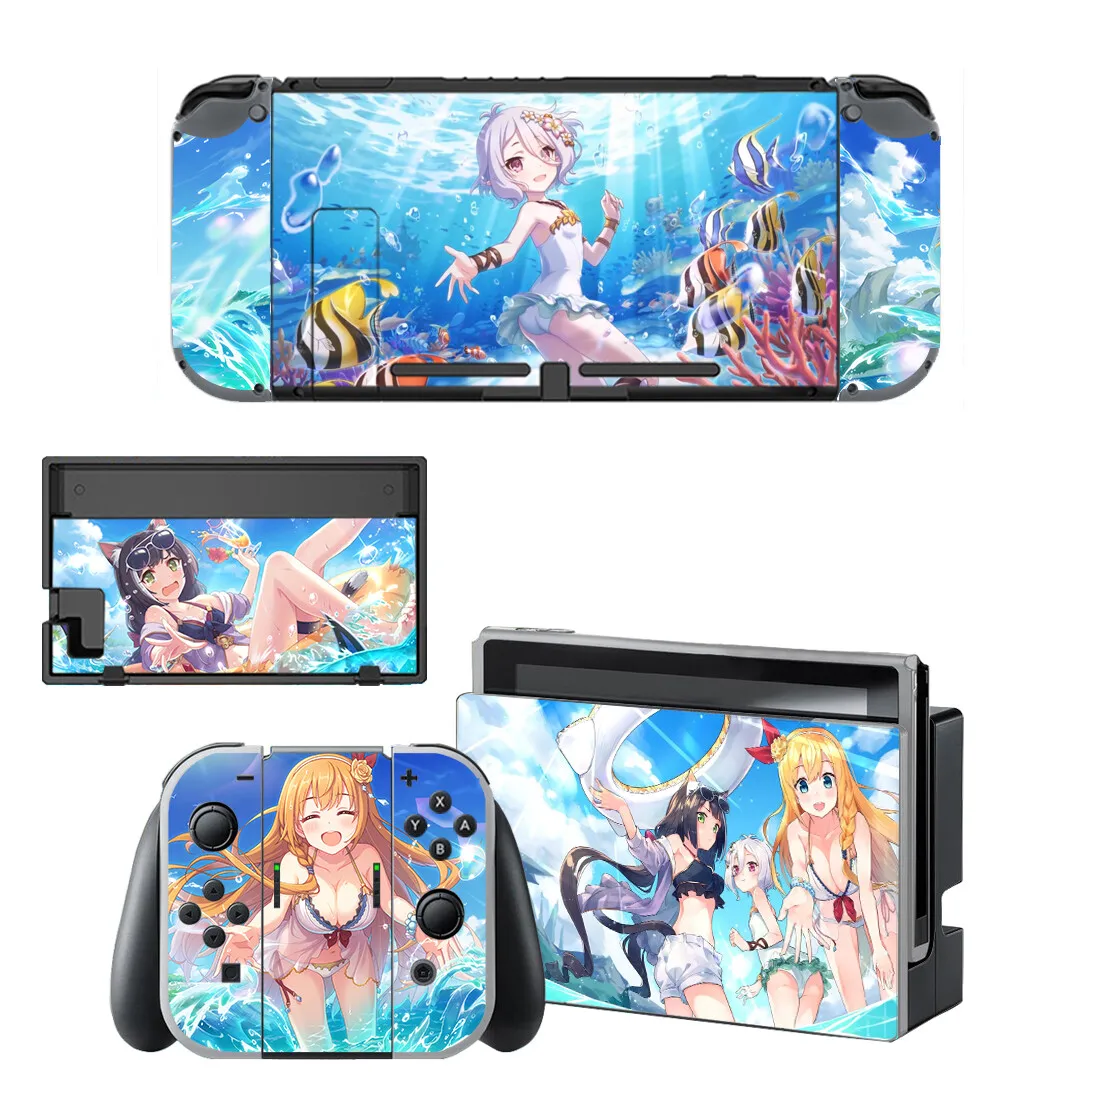 Anime Cute Girl Screen Protector Sticker Skin for Nintendo Switch NS Console Dock Charger Stand Holder Joy-con Controller Vinyl